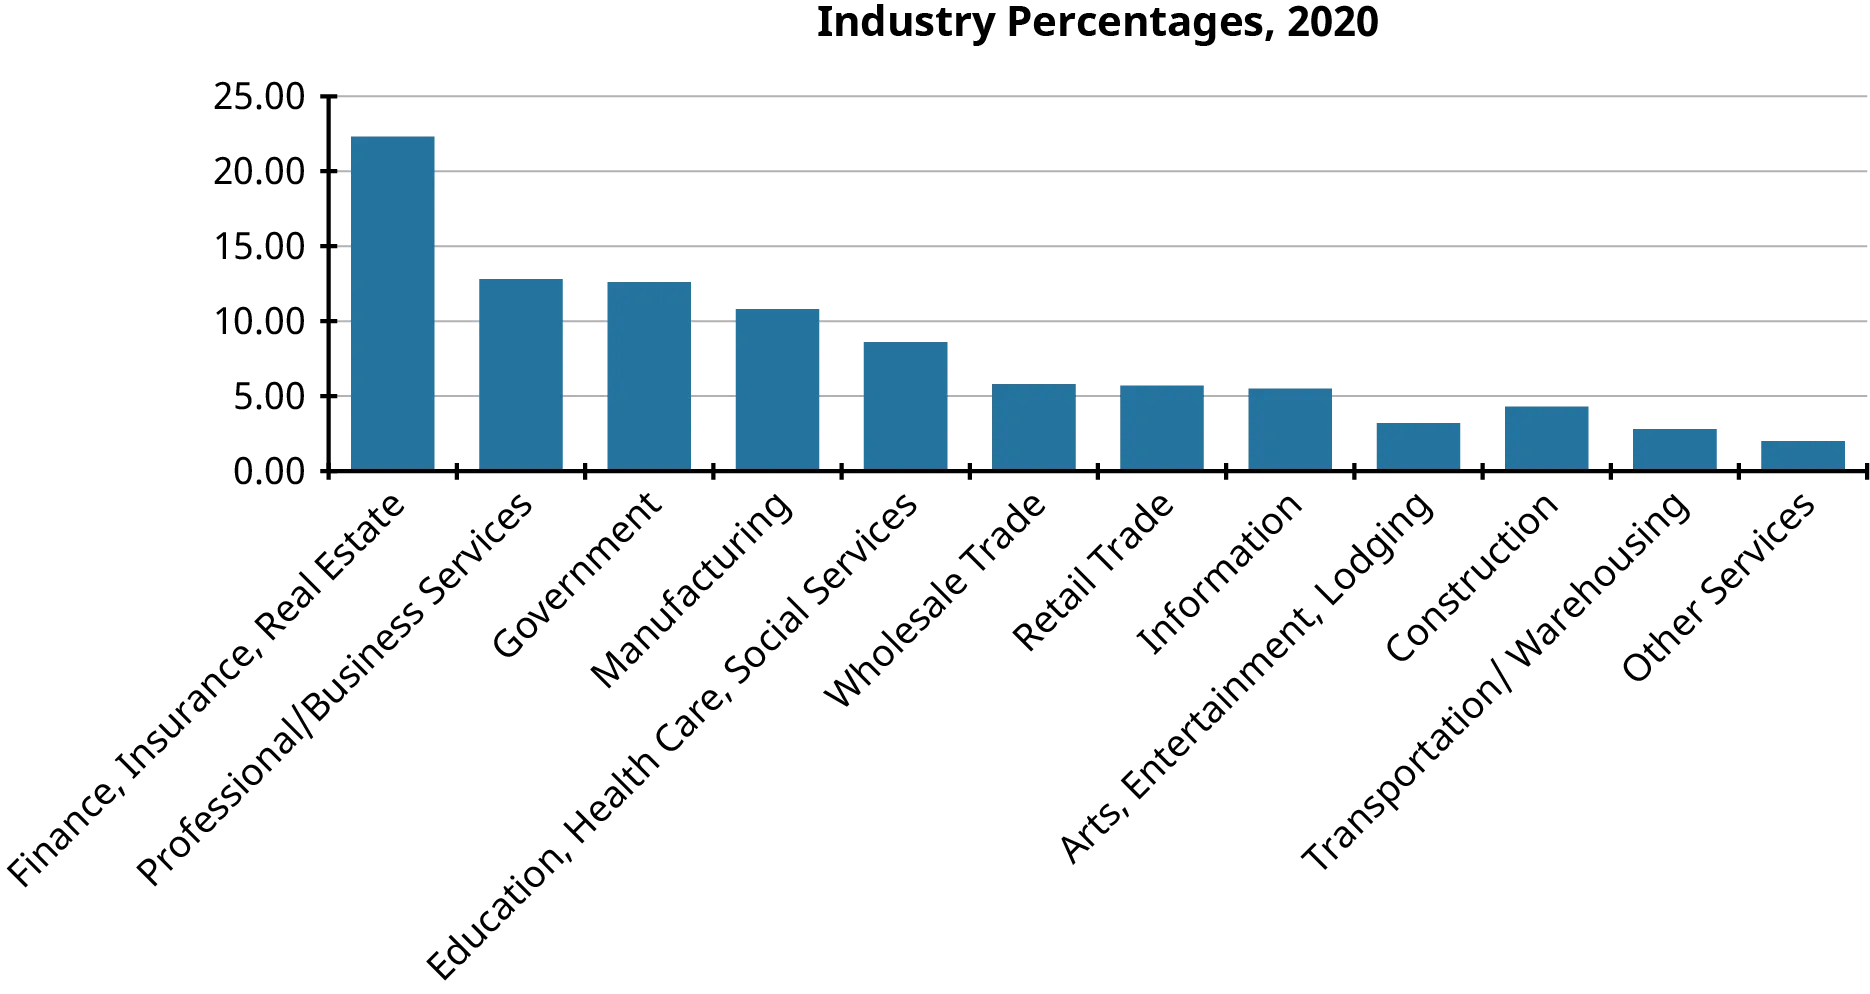 A bar graph shows industry percentages for service industries in 2020. The y-axis starts at 0 and goes up to 25 in increments of 5. The x-axis lists the service industries included. Percentages on the graph are: Finance, Insurance, Real Estate 22%; Professional Business Services 13%; Government 13%; Manufacturing 11%; Education, Health Care, Social Services 8%; Wholesale Trade 6%; Retail Trade 6%; Information 6%; Arts, Entertainment, Lodging 3%; Construction 4%; Transportation Warehousing 3%; Other Services 2%.